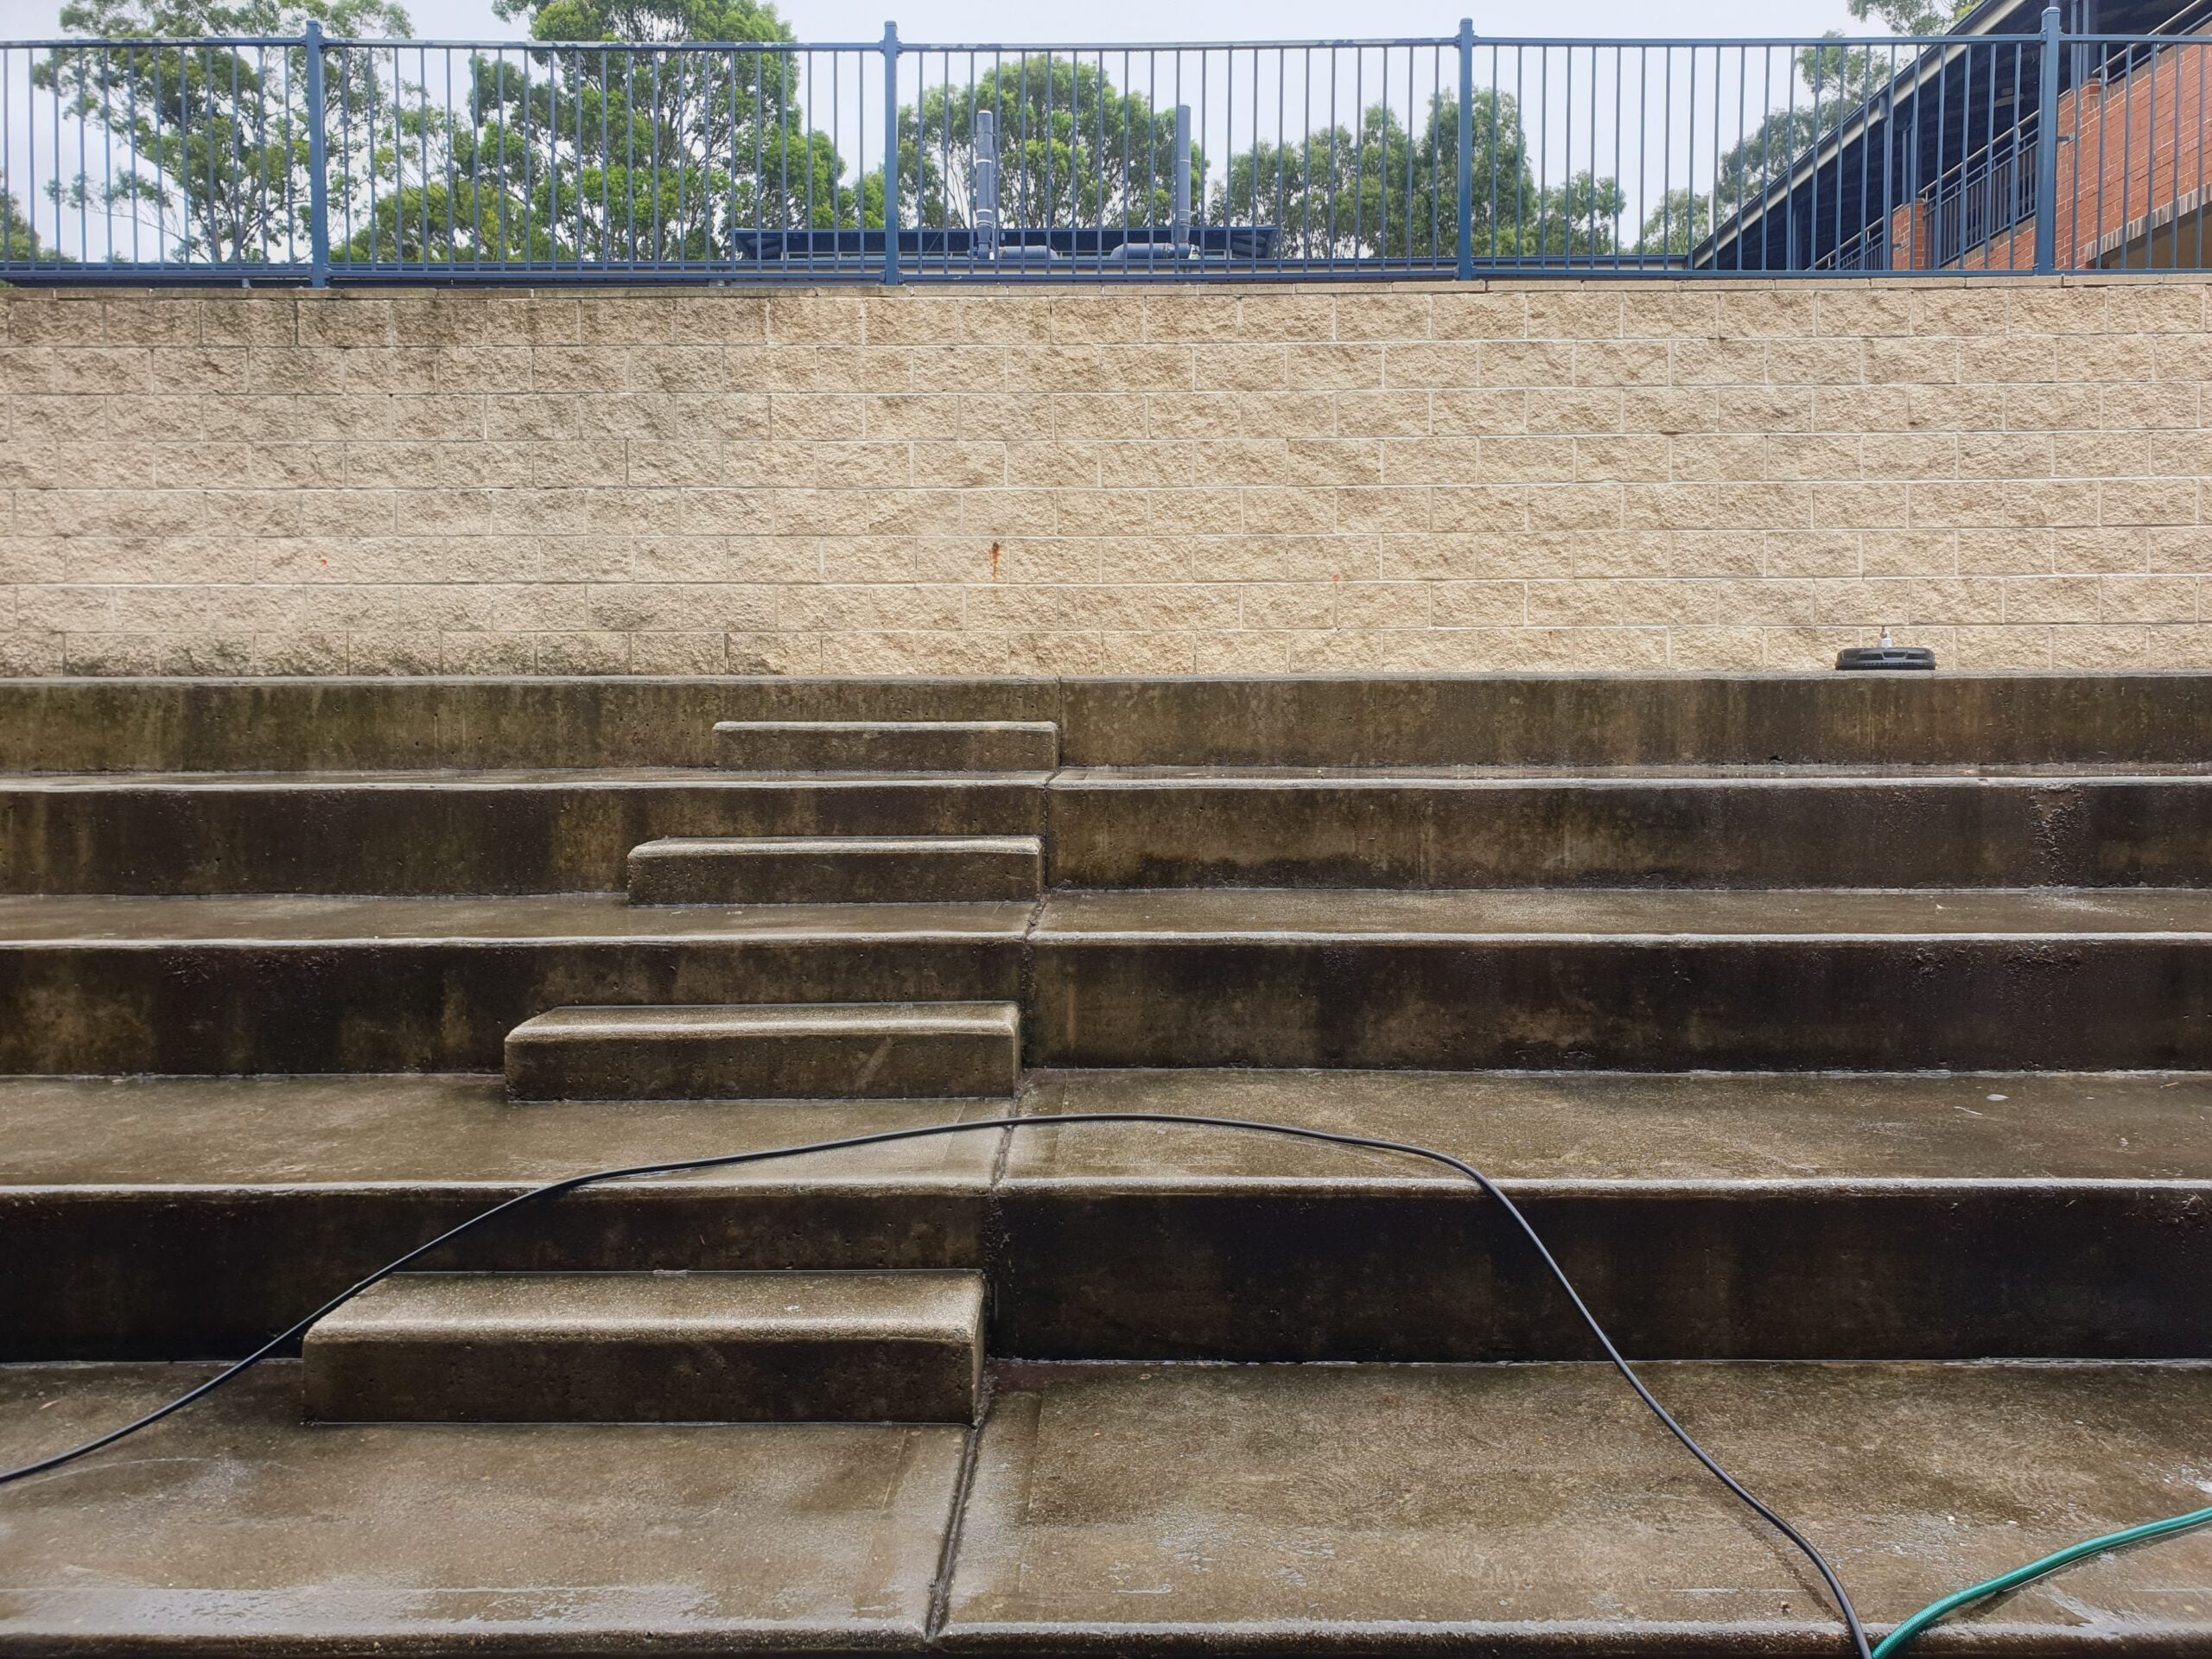 Stairs Pressure Cleaning and Washing Services in Sydney